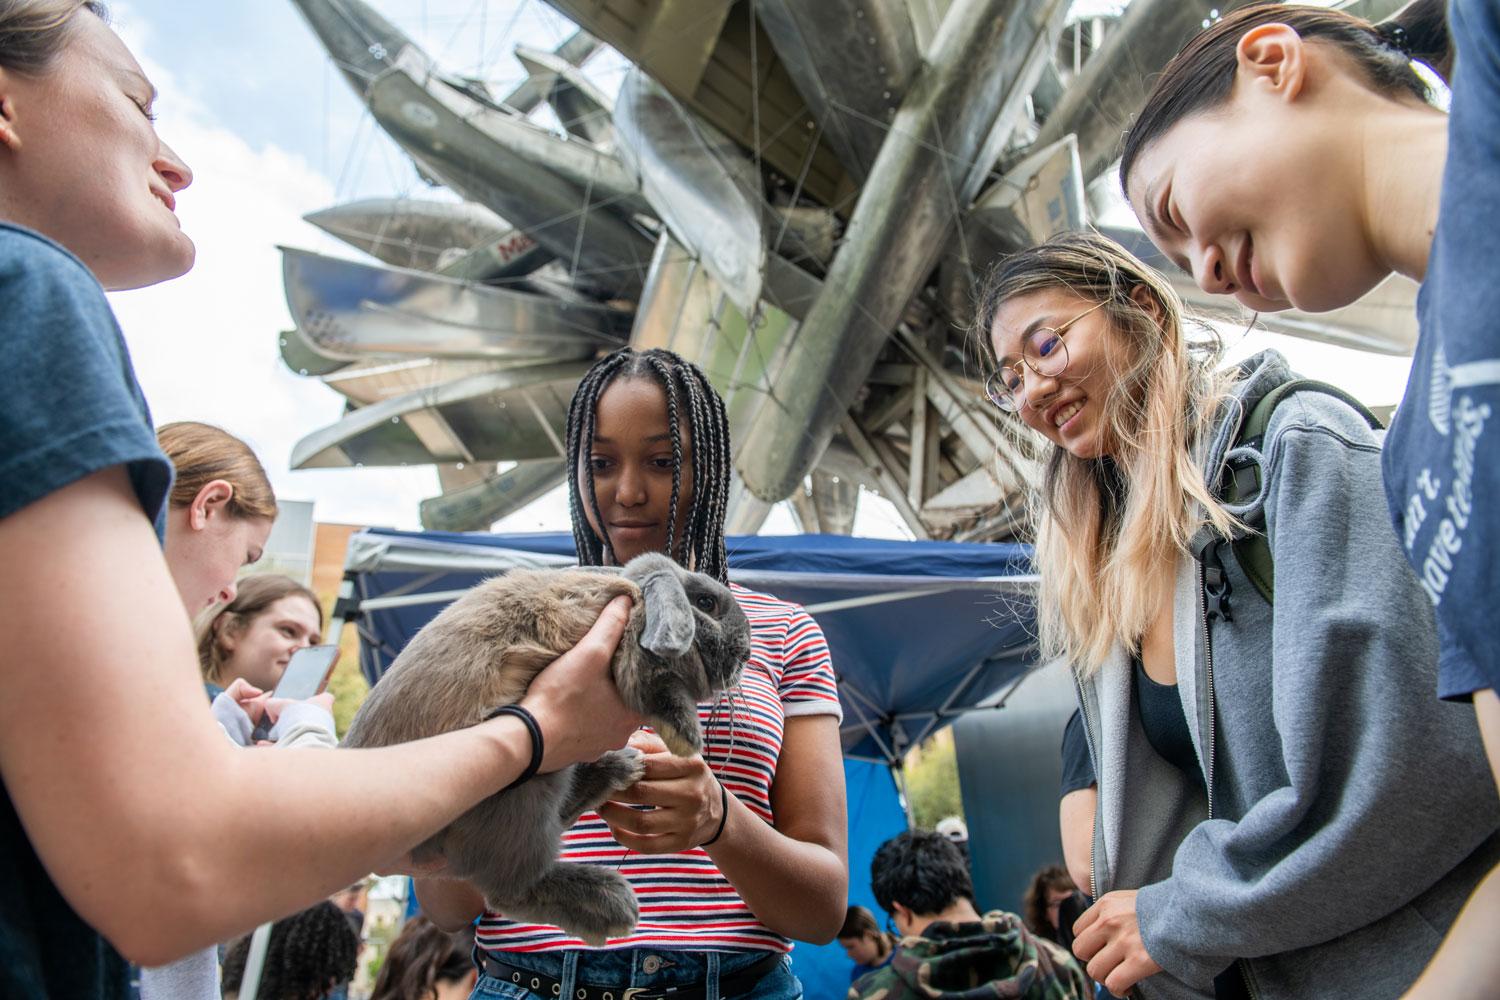 Students handle small animals in a petting zoo, with a sculpture behind them